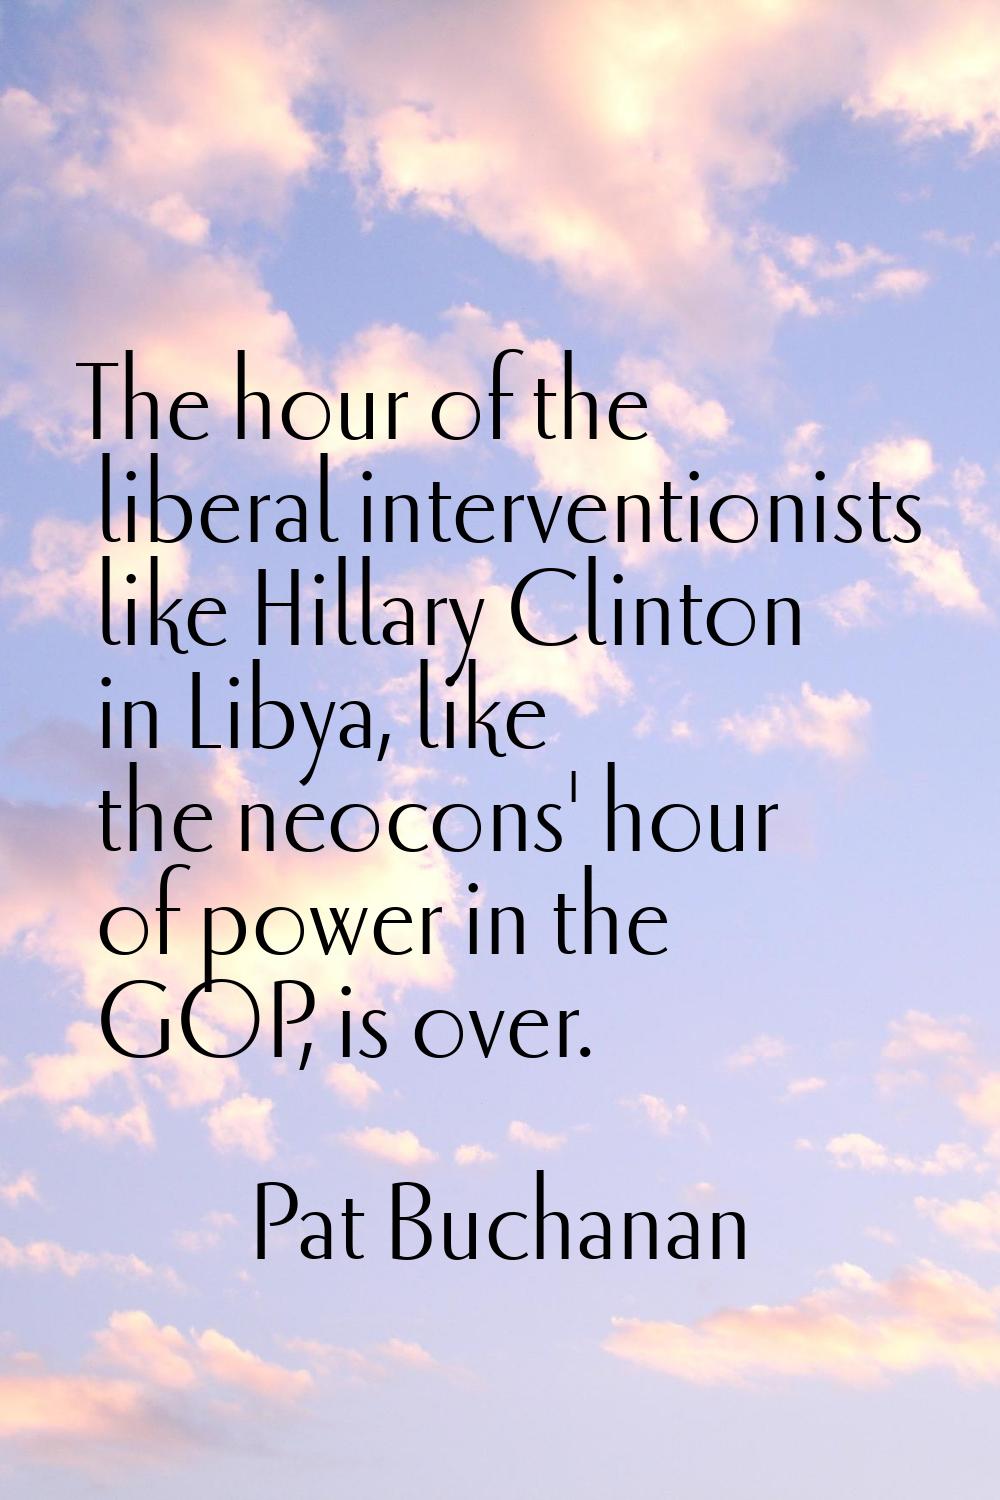 The hour of the liberal interventionists like Hillary Clinton in Libya, like the neocons' hour of p